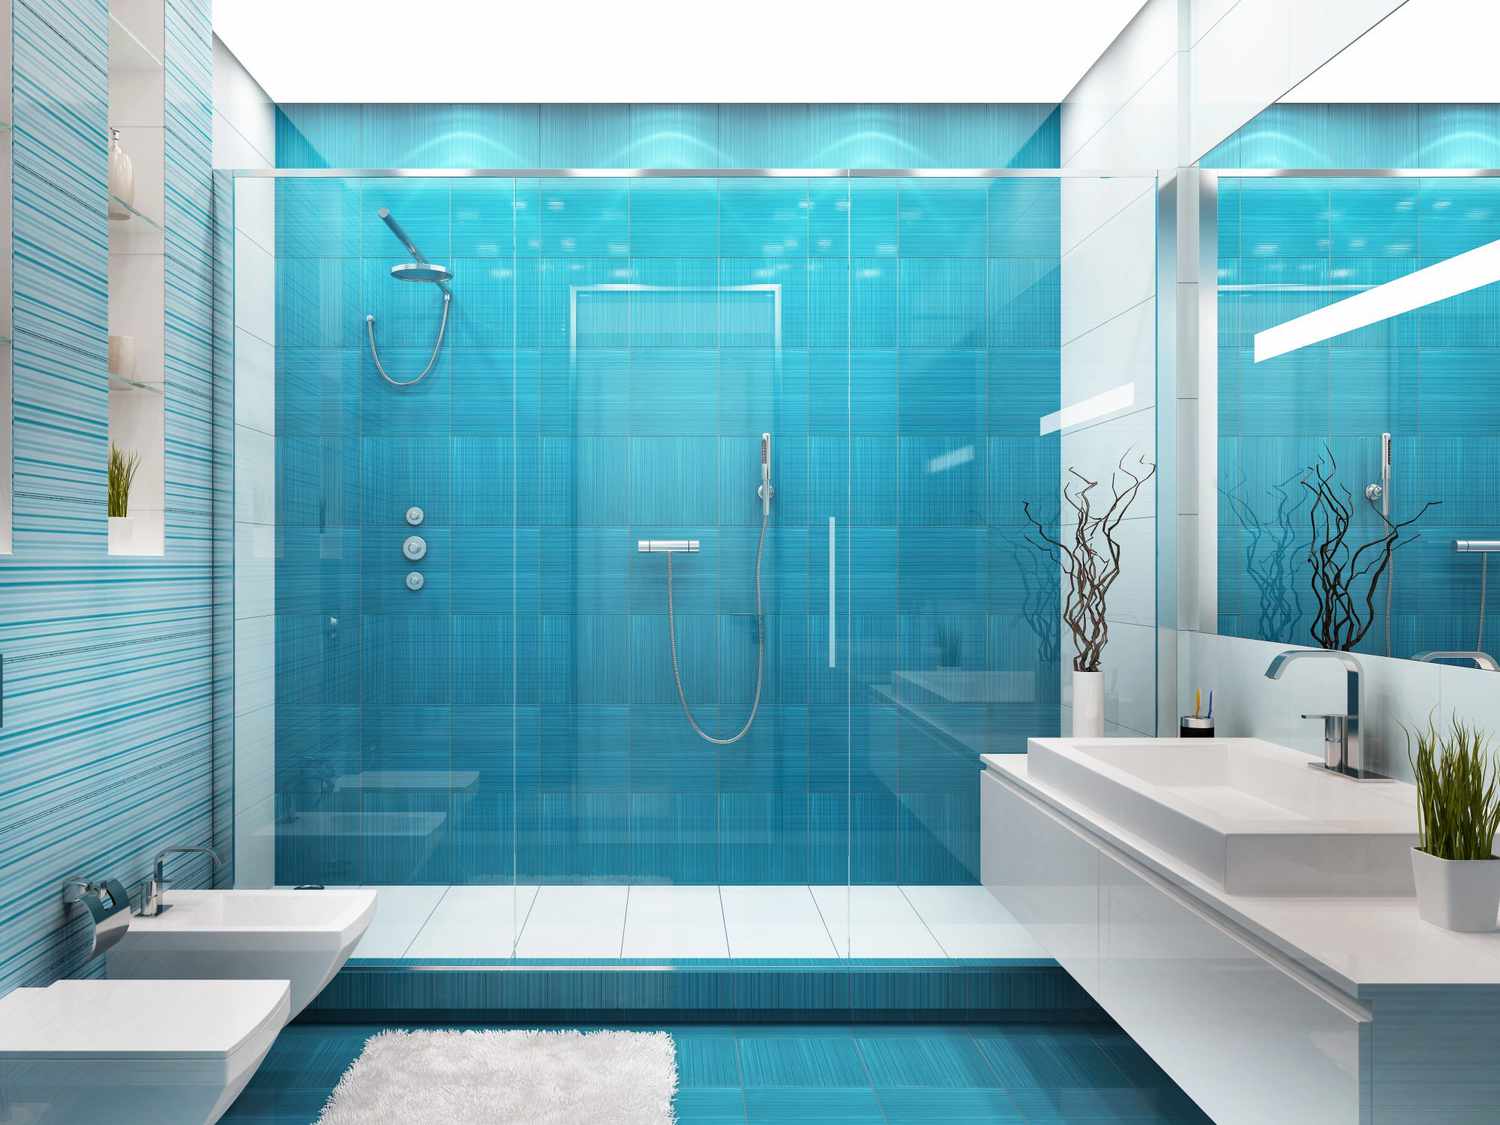 How to Make Your Glass Shower Doors Sparkle